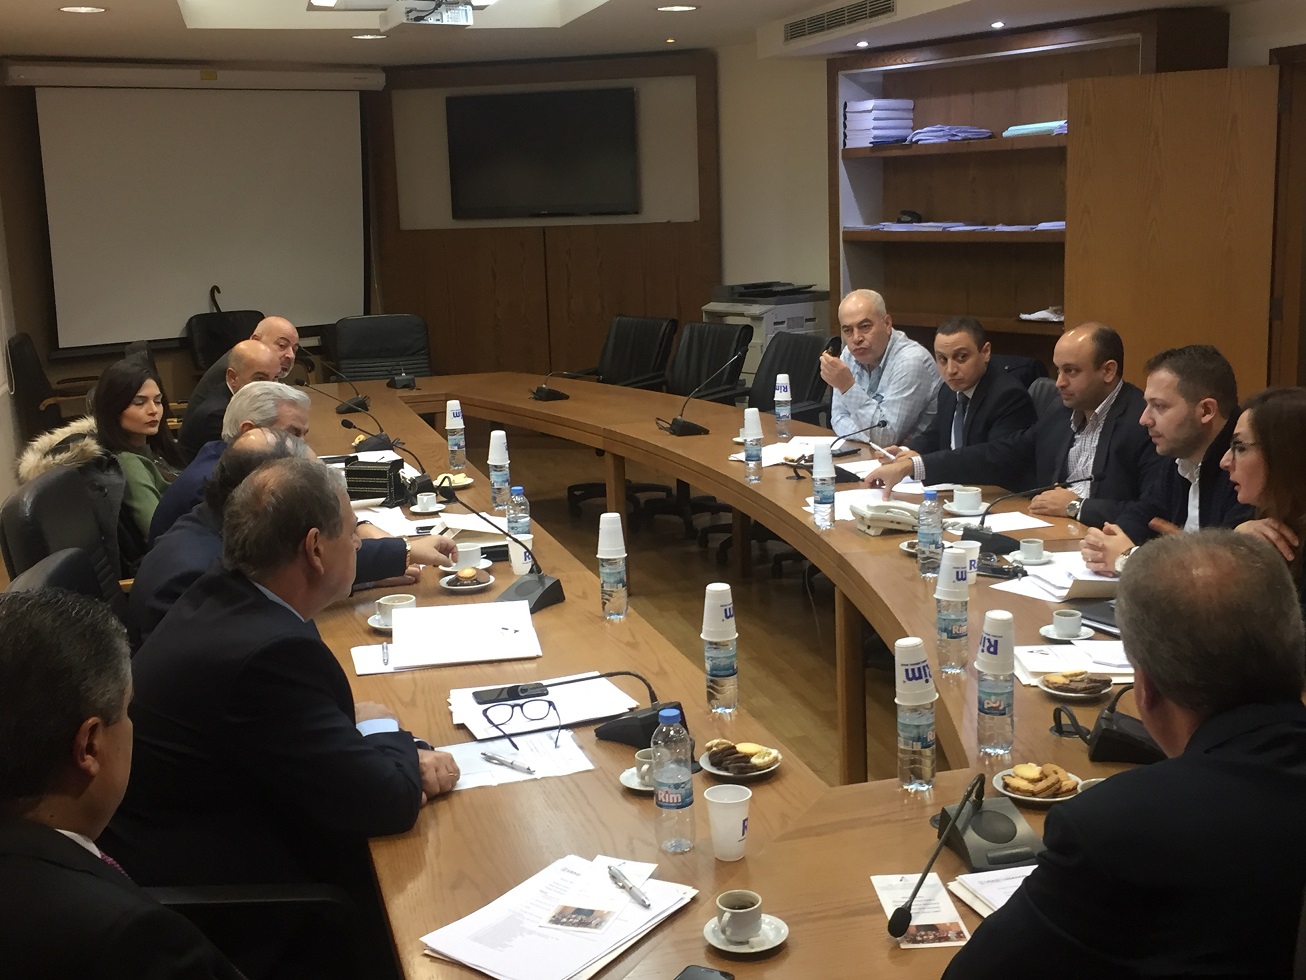 Third Steering Committee Meeting of the Project: "Building a Rule of Law Society"